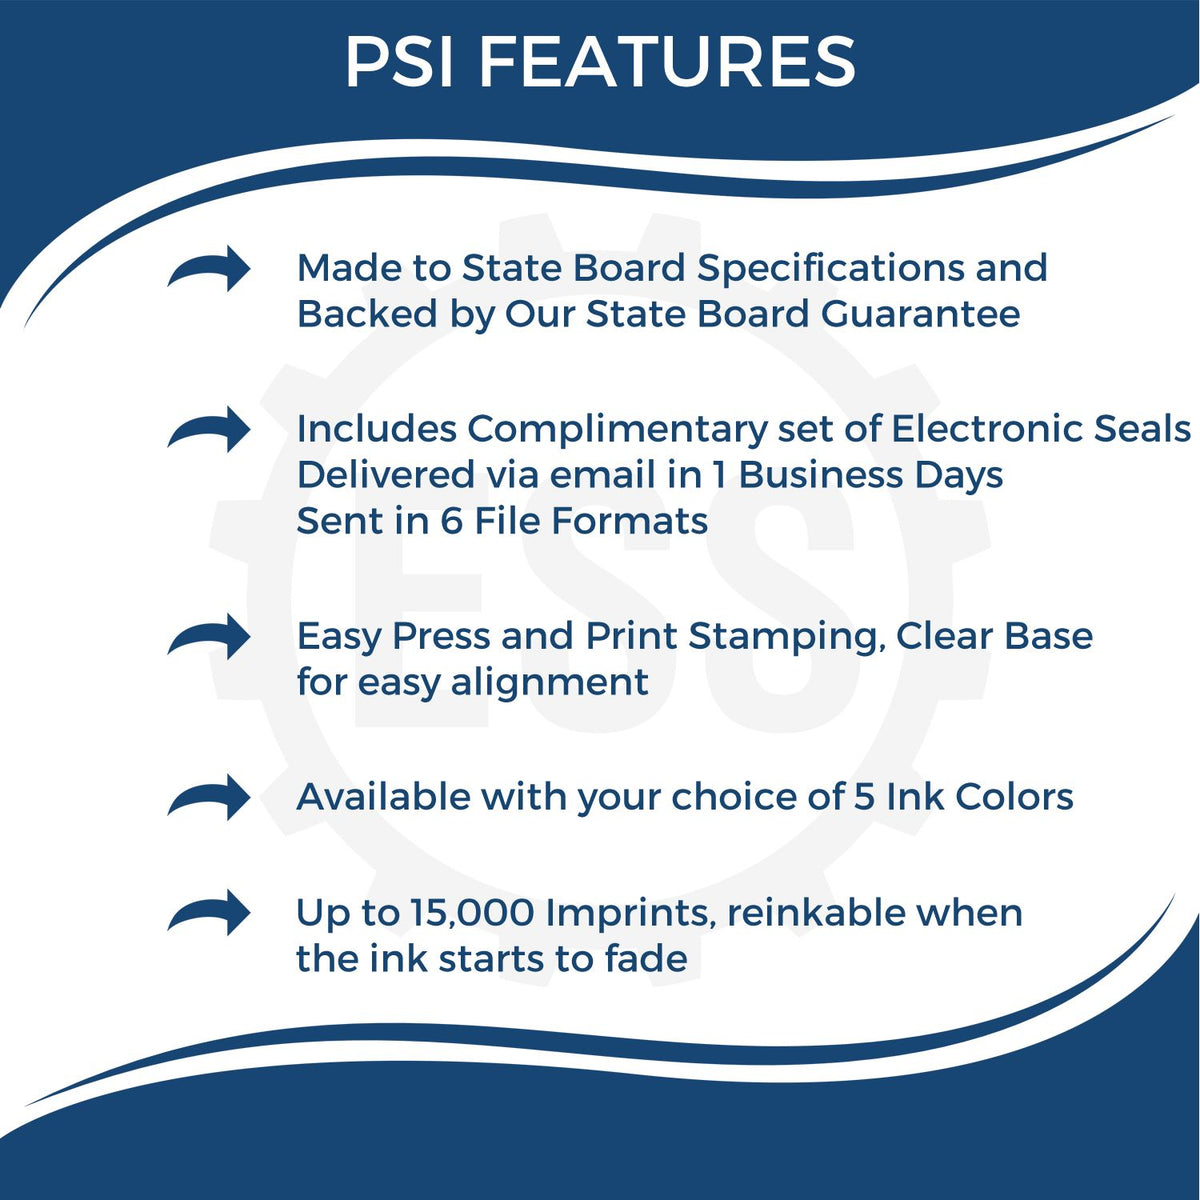 A picture of an infographic highlighting the selling points for the PSI Florida Notary Stamp